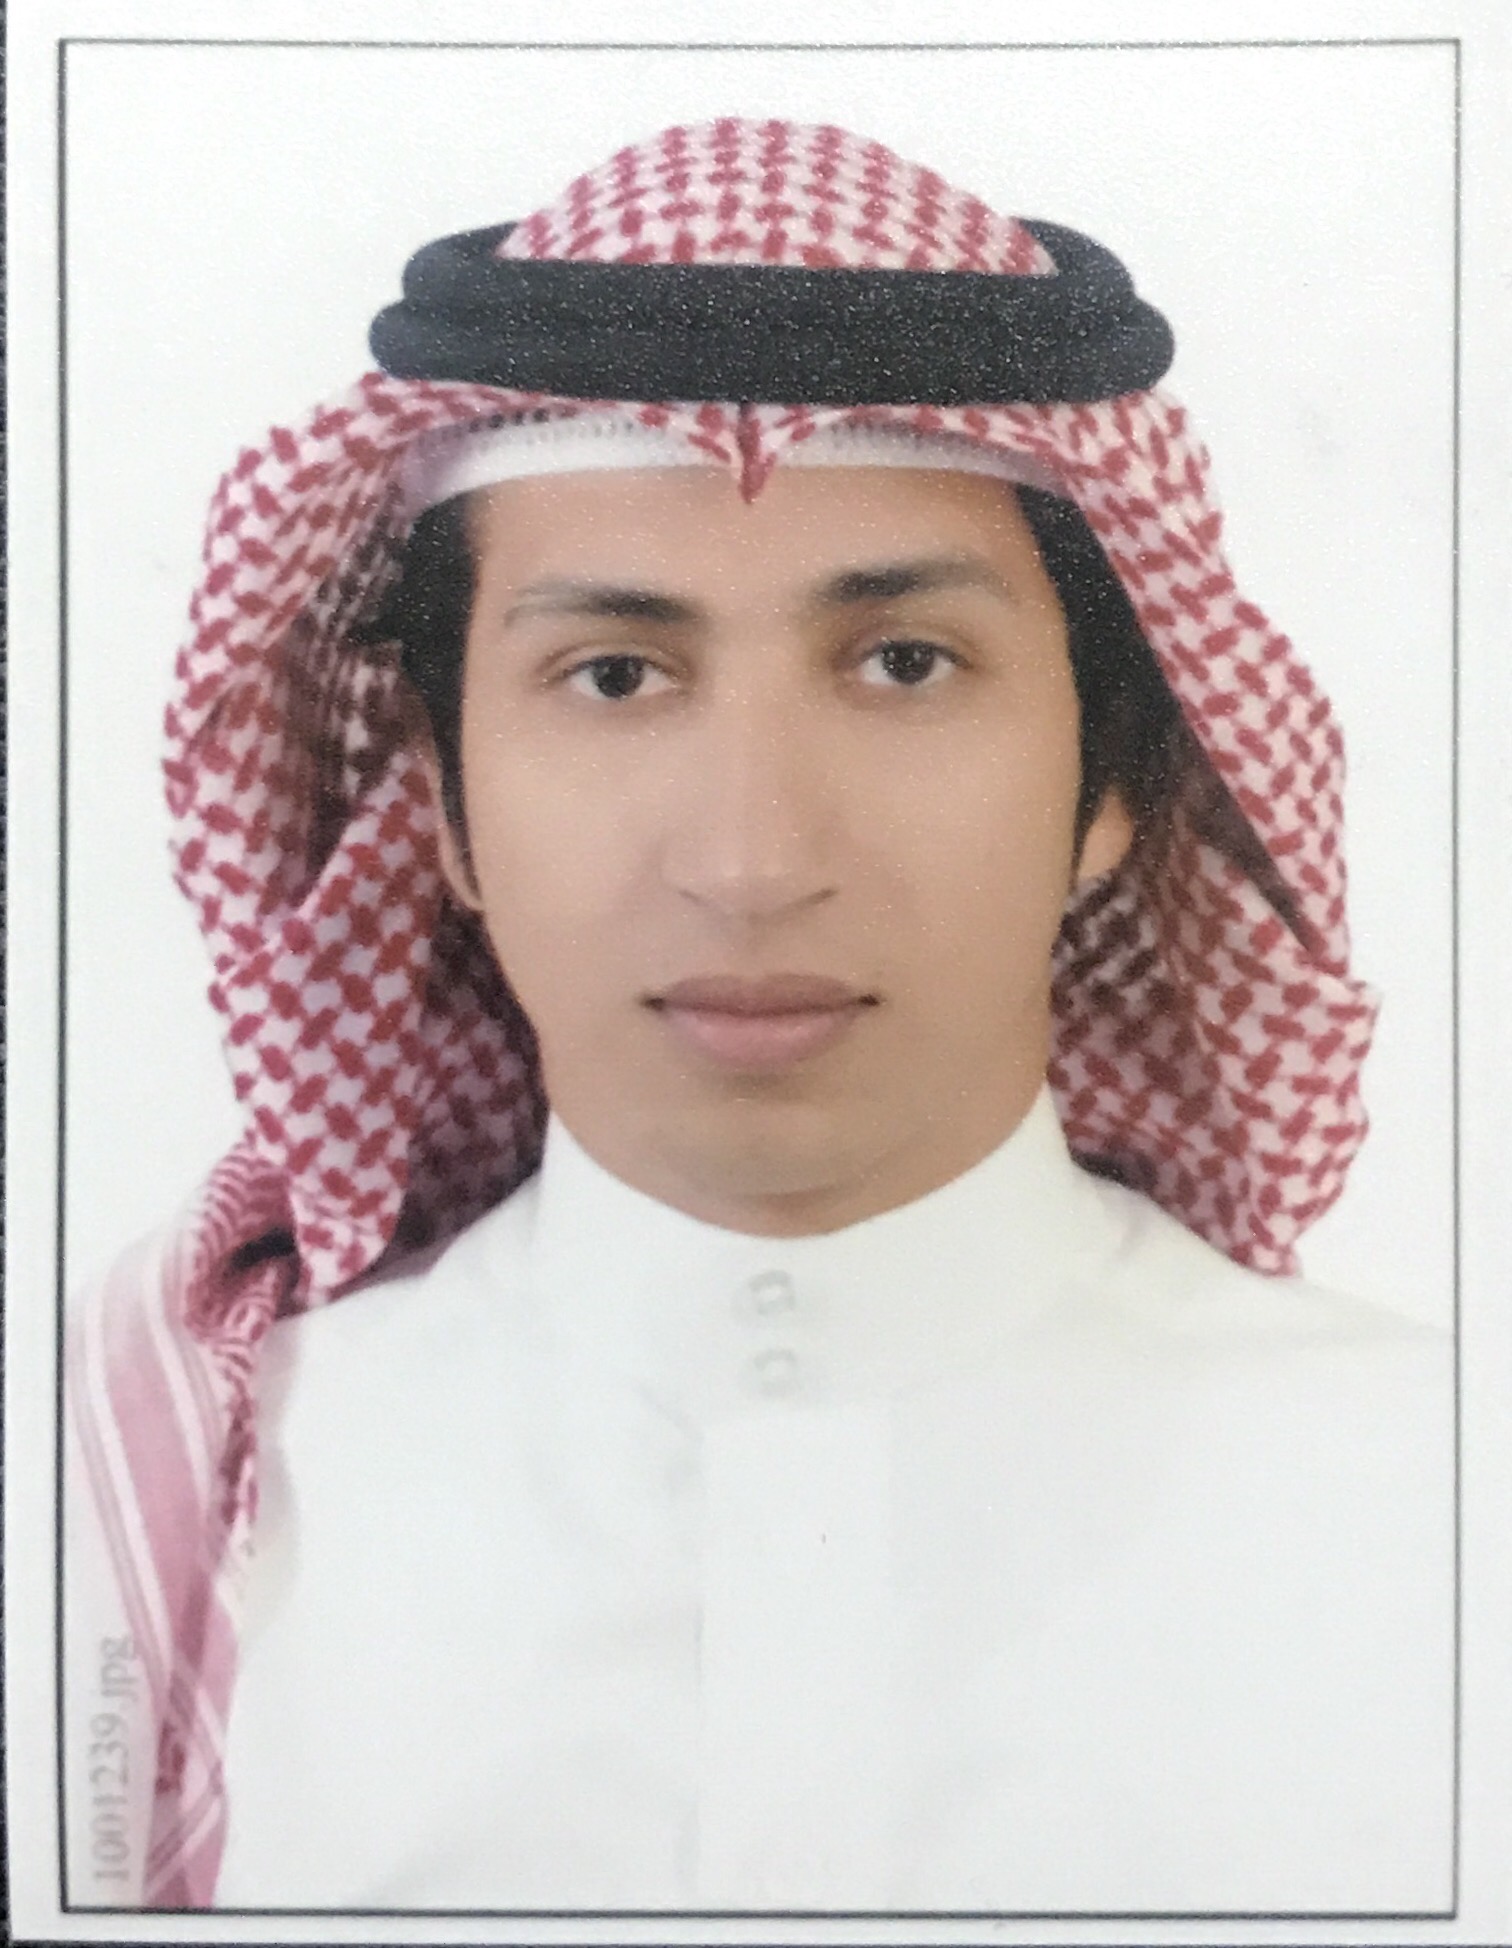 student 201027180 ALSAUD, MOHAMMED IBRAHIM OMAR picture